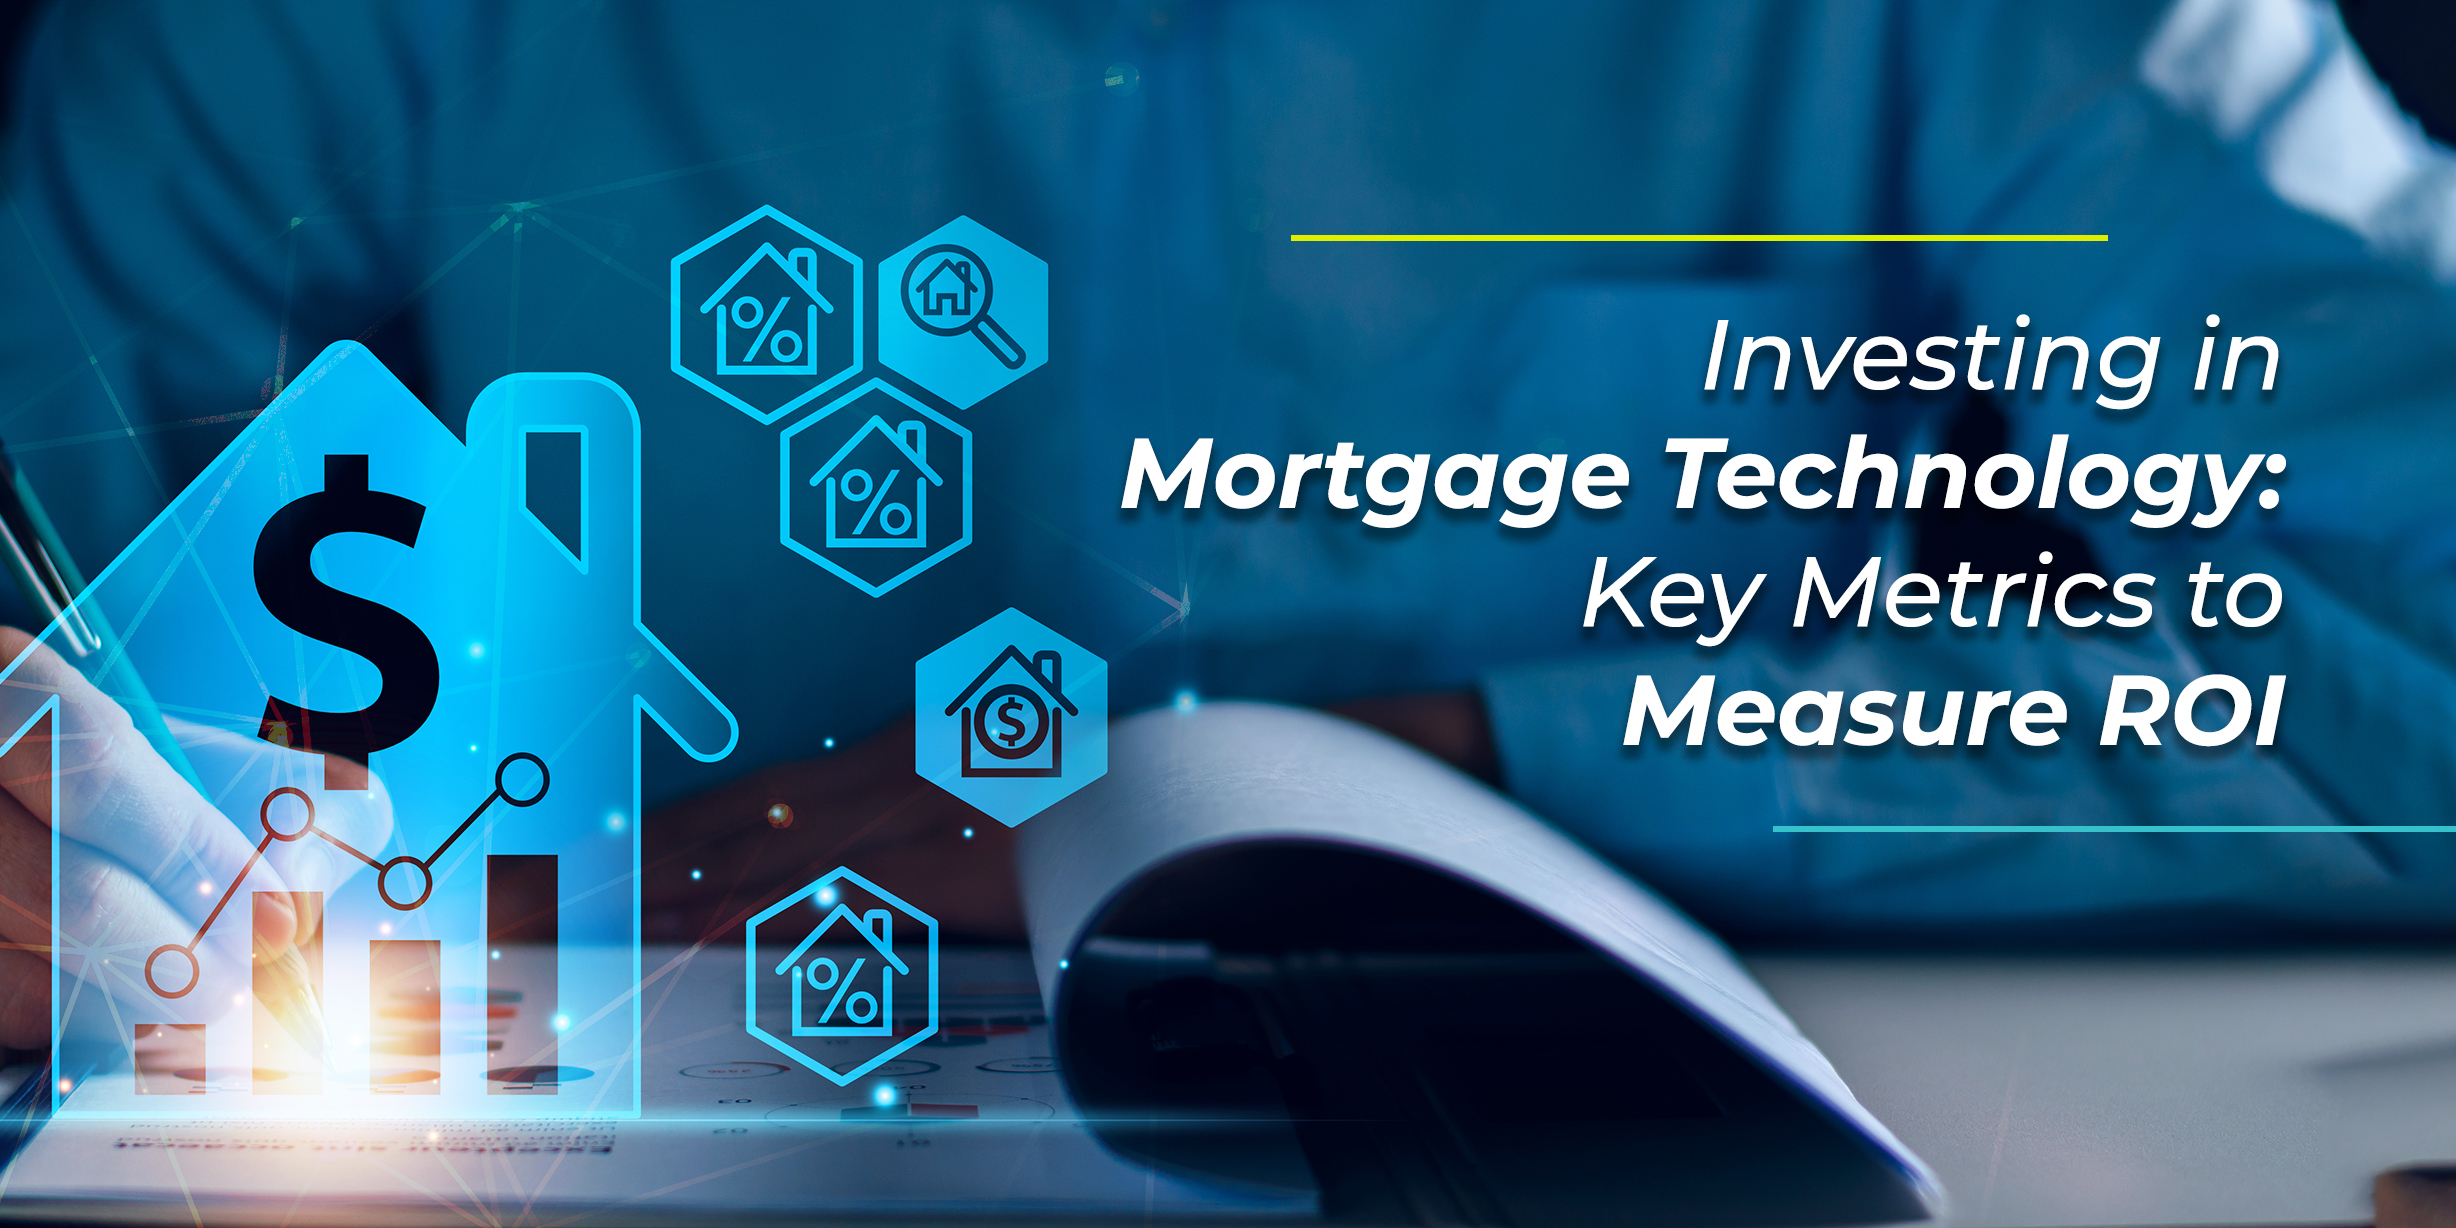 Investing in Mortgage Technology: Key Metrics to Measure ROI